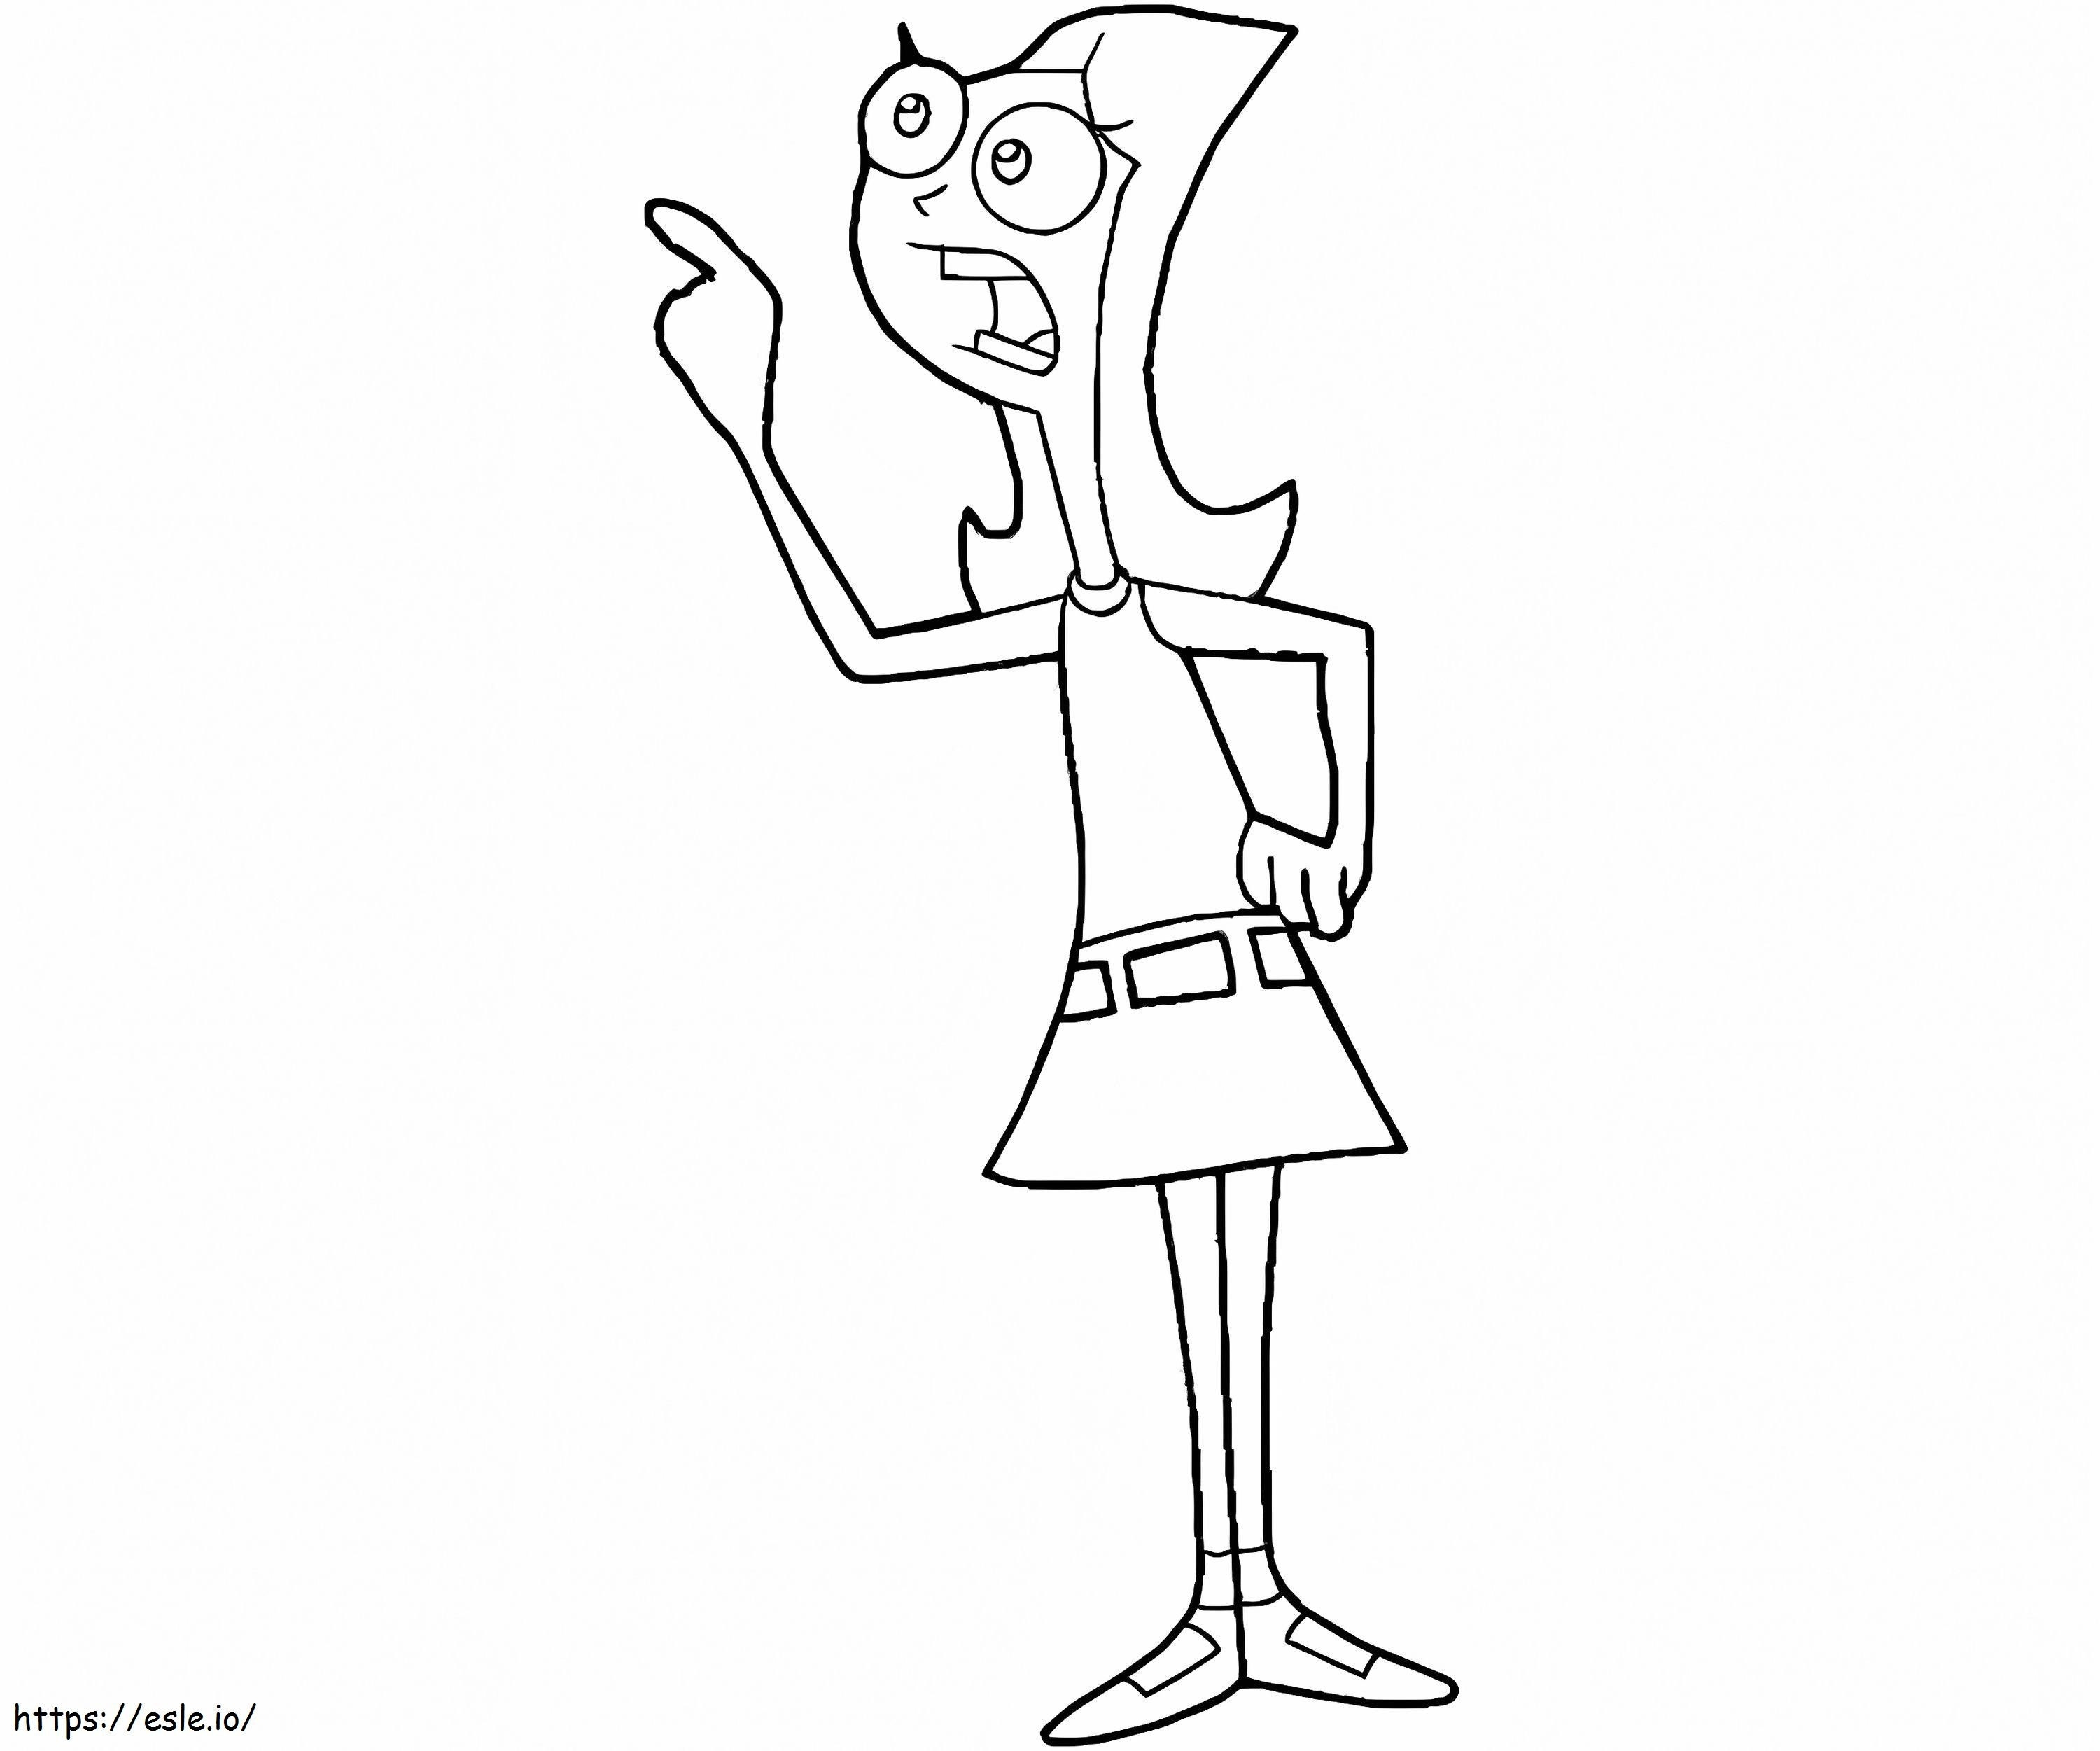 Down By Candace coloring page